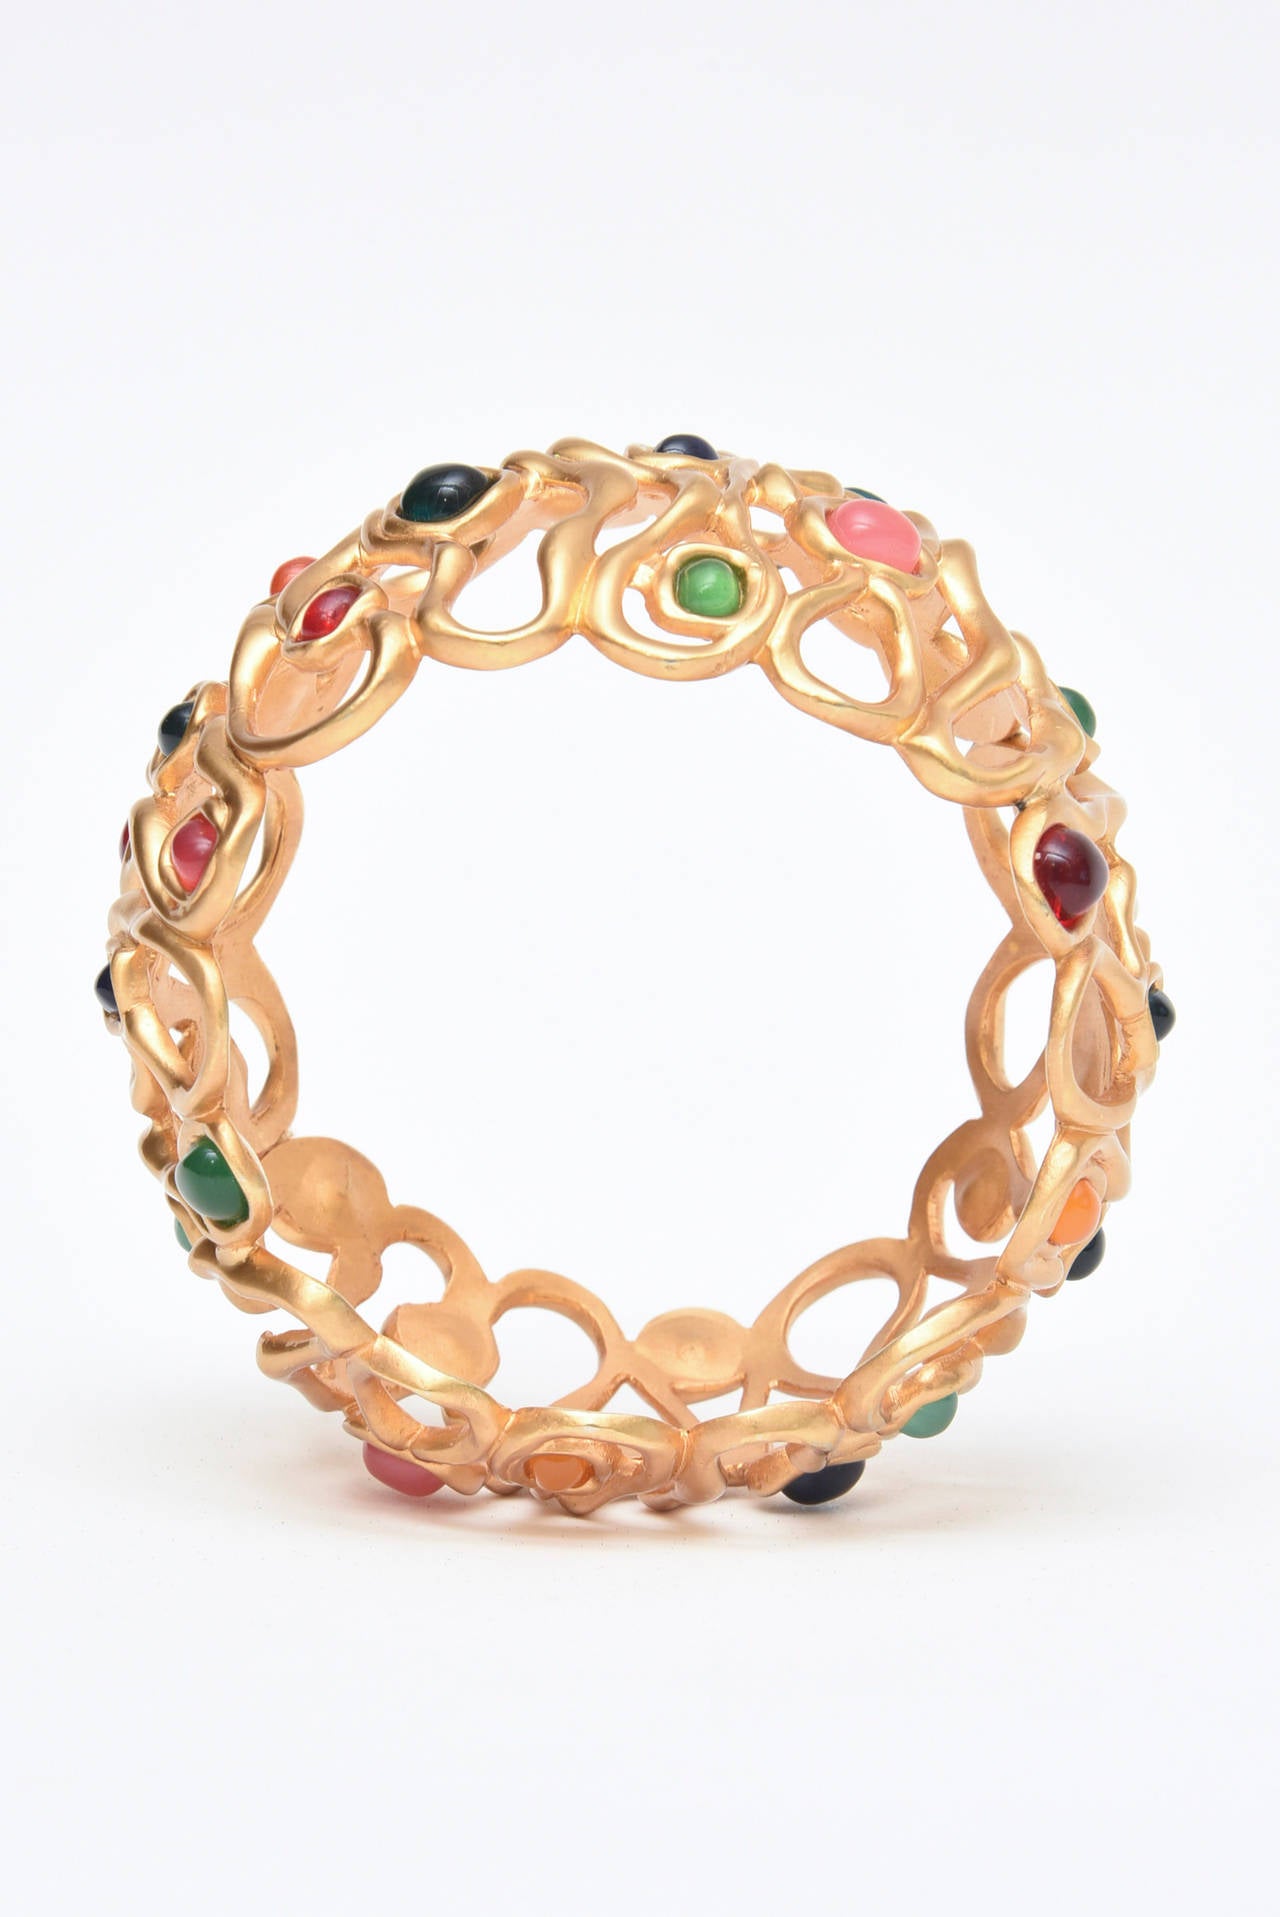  Jewel Tone Stone Cuff Bracelet With Gold Plate In Good Condition For Sale In North Miami, FL